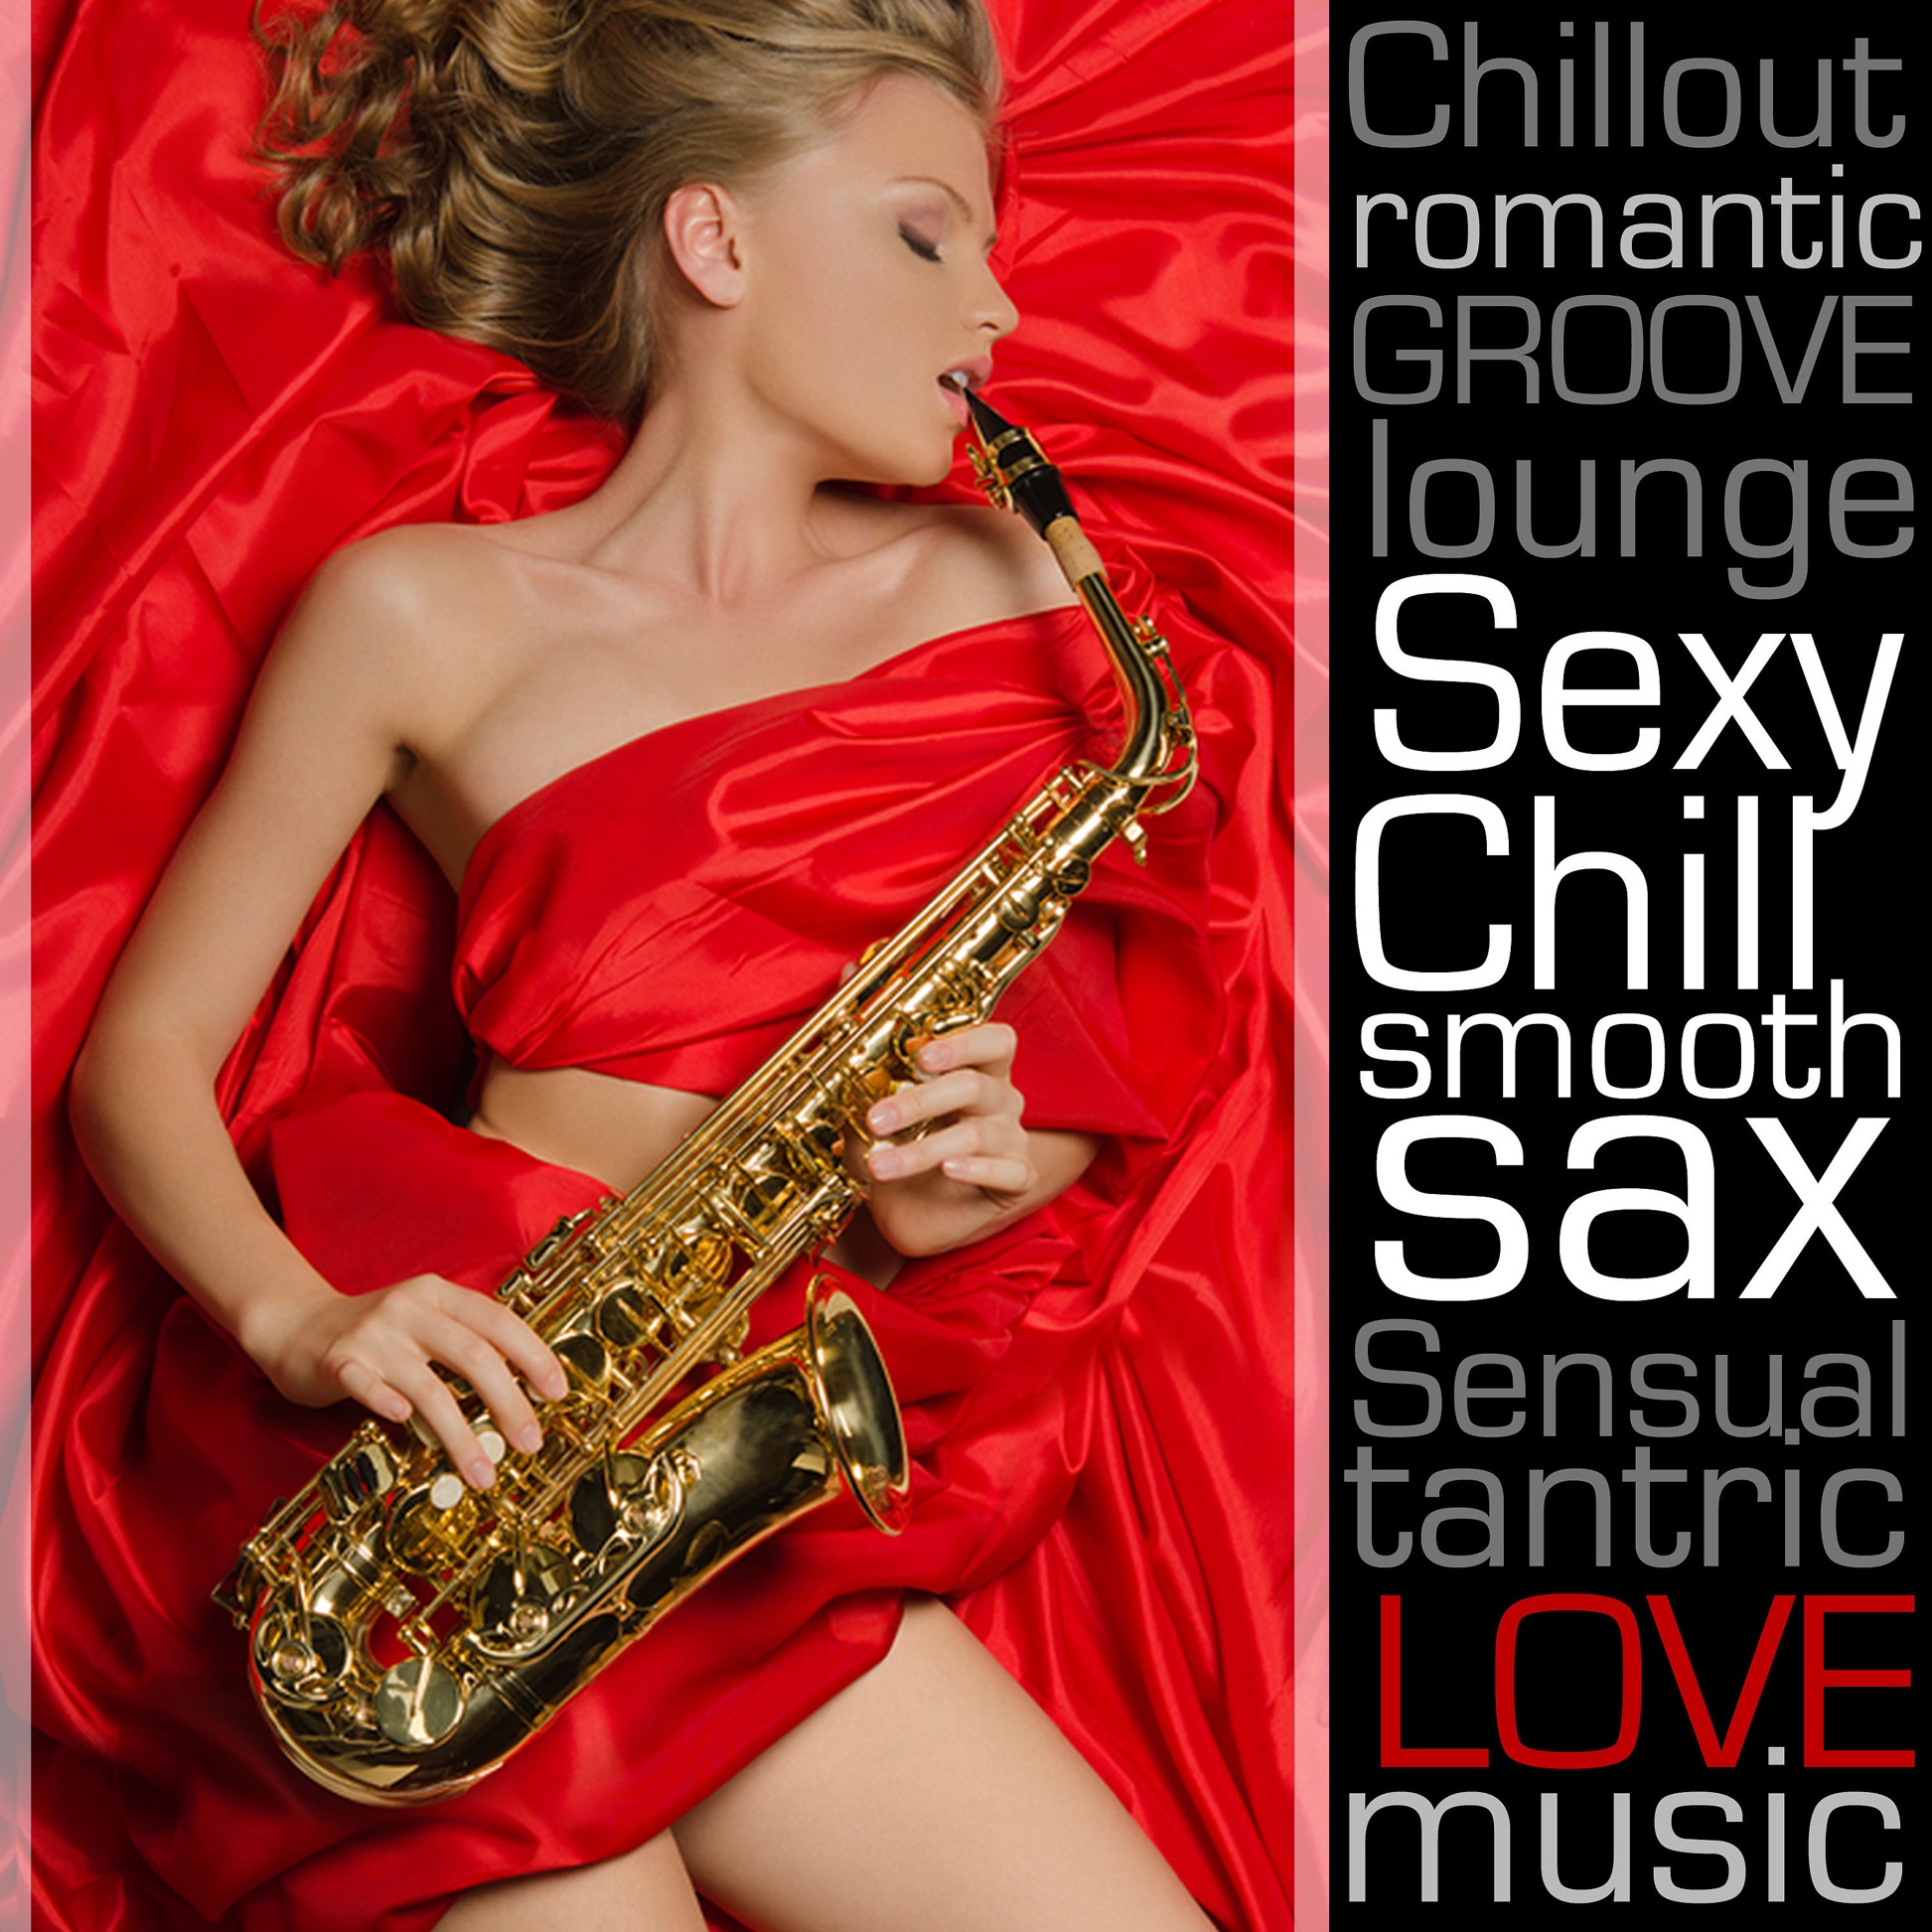 Sexy Chill Smooth Sax: Romantic Chillout Instrumental Lounge Music Songs on  Saxophone for Dinner Music, Sensual Tantric Background Music for Lovers,  Wedding Music & Piano Bar - New York Jazz Lounge -